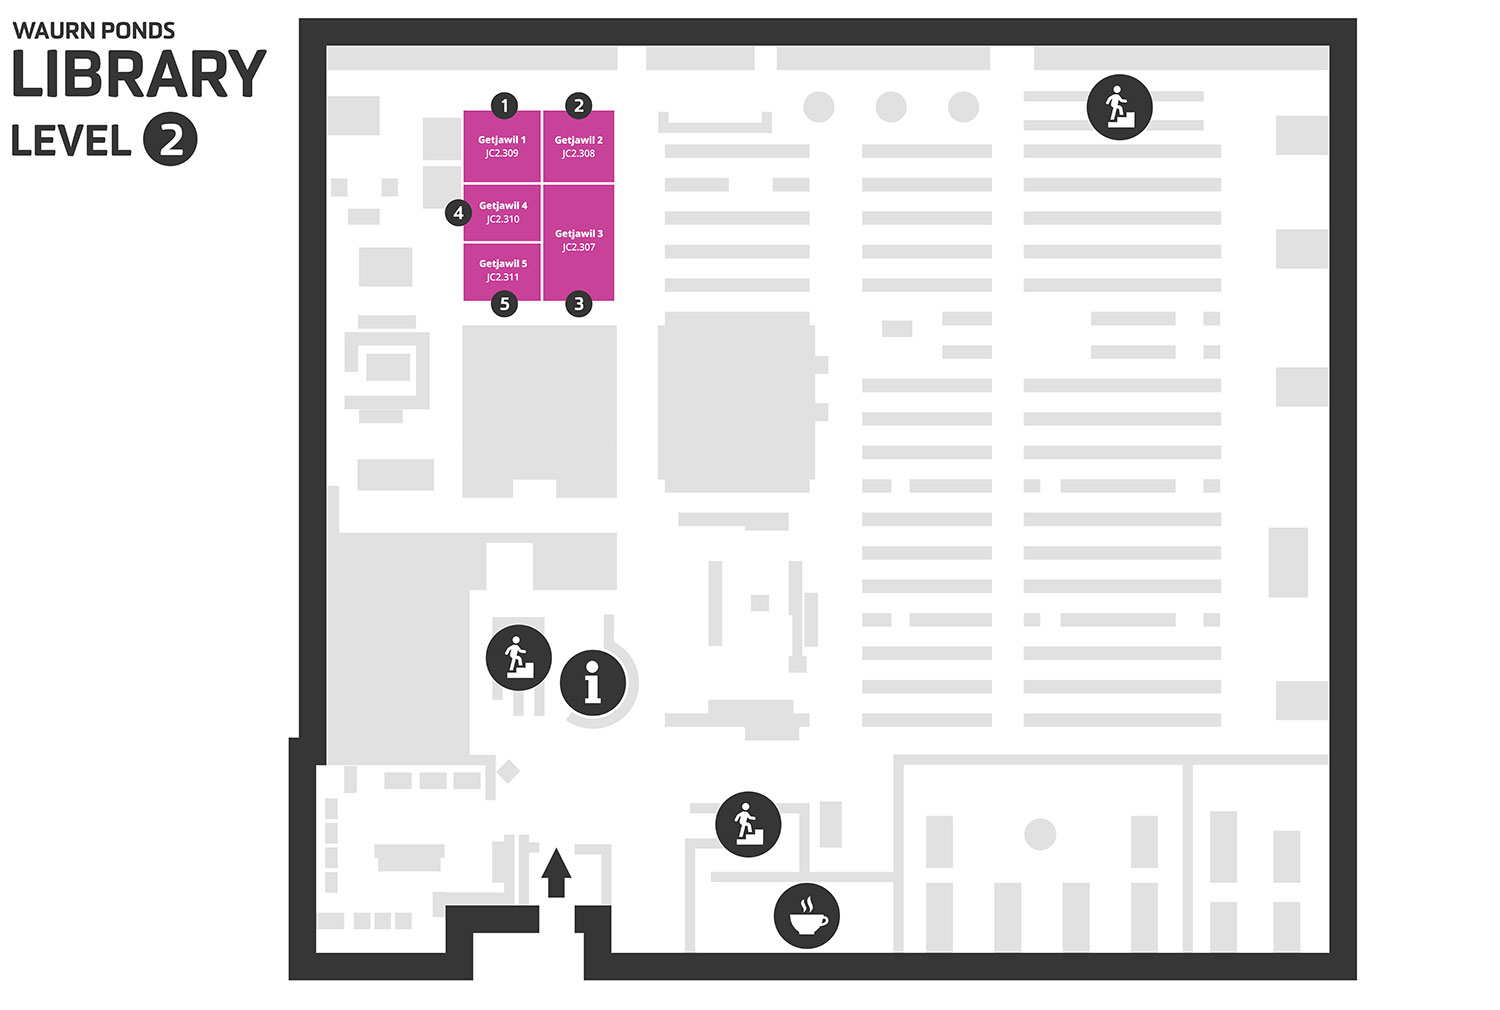 Floorplan of Waurn Ponds Campus Library Level 2, showing bookable rooms